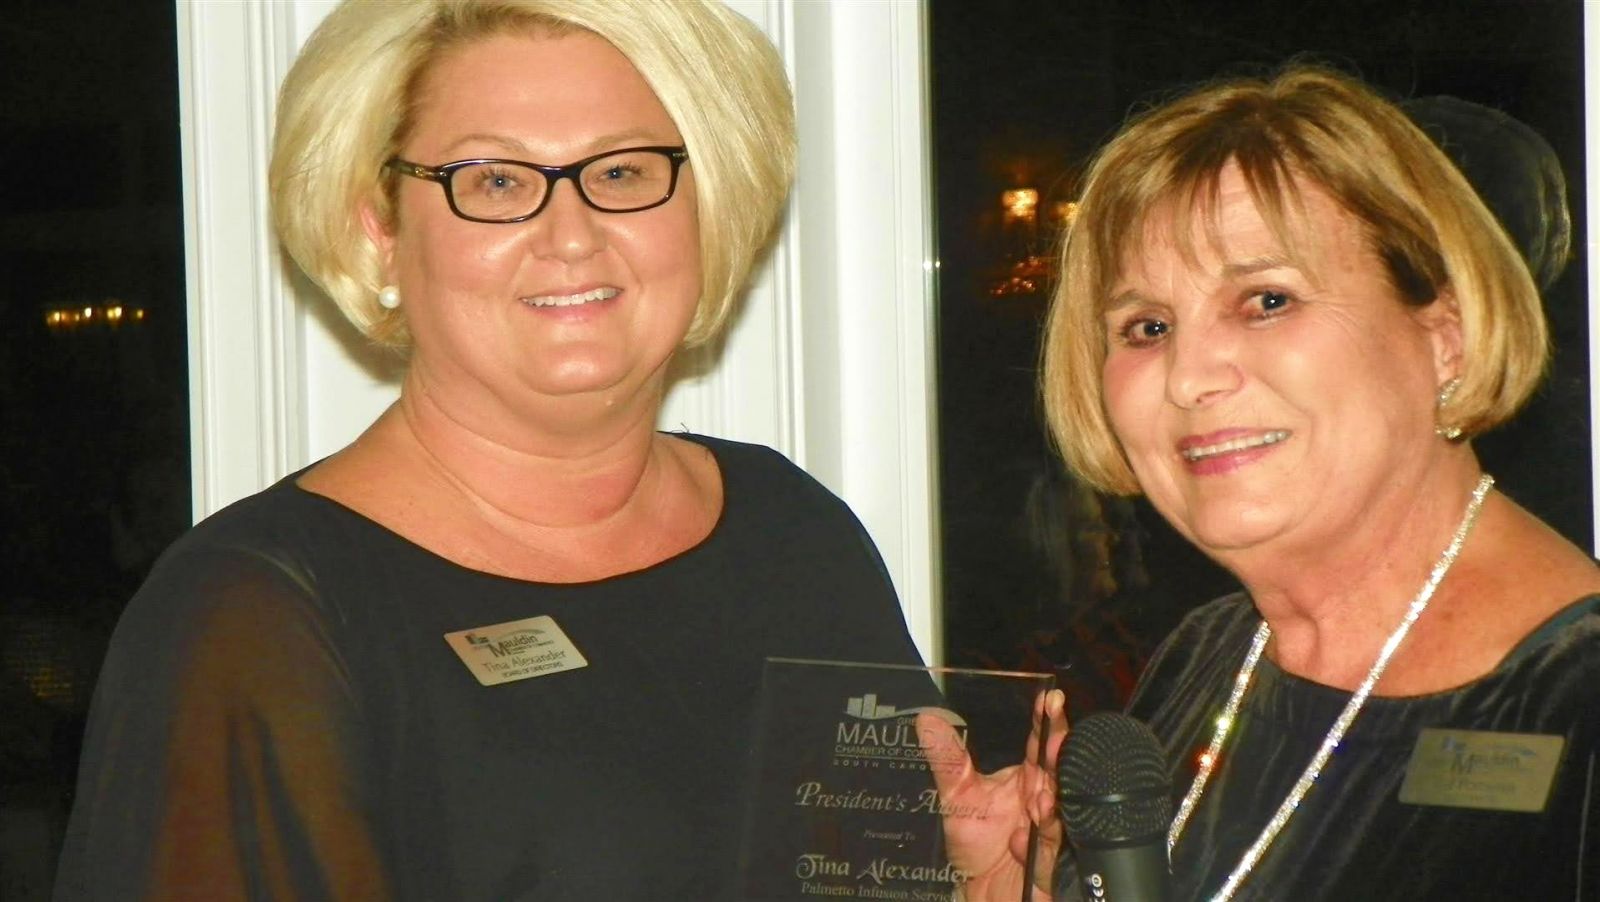 Tina Alexander of Palmetto Infusion Services was presented with the President's Award by chamber CEO Pat Pomeroy. (Photo/Provided)